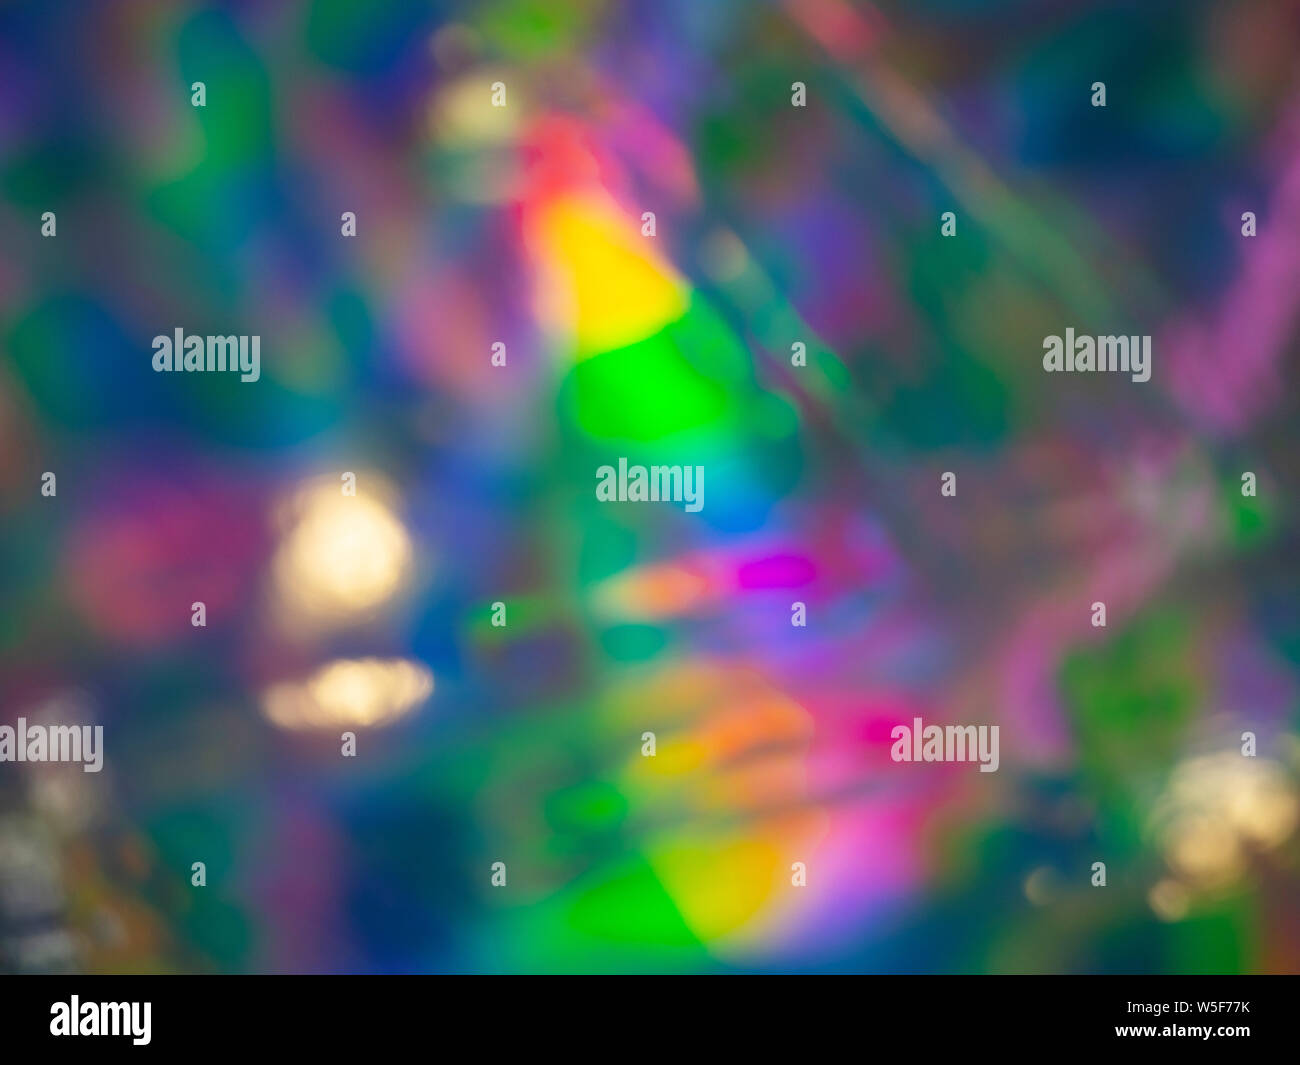 Holographic Paper Reflects Rainbowcolored Light High-Res Stock